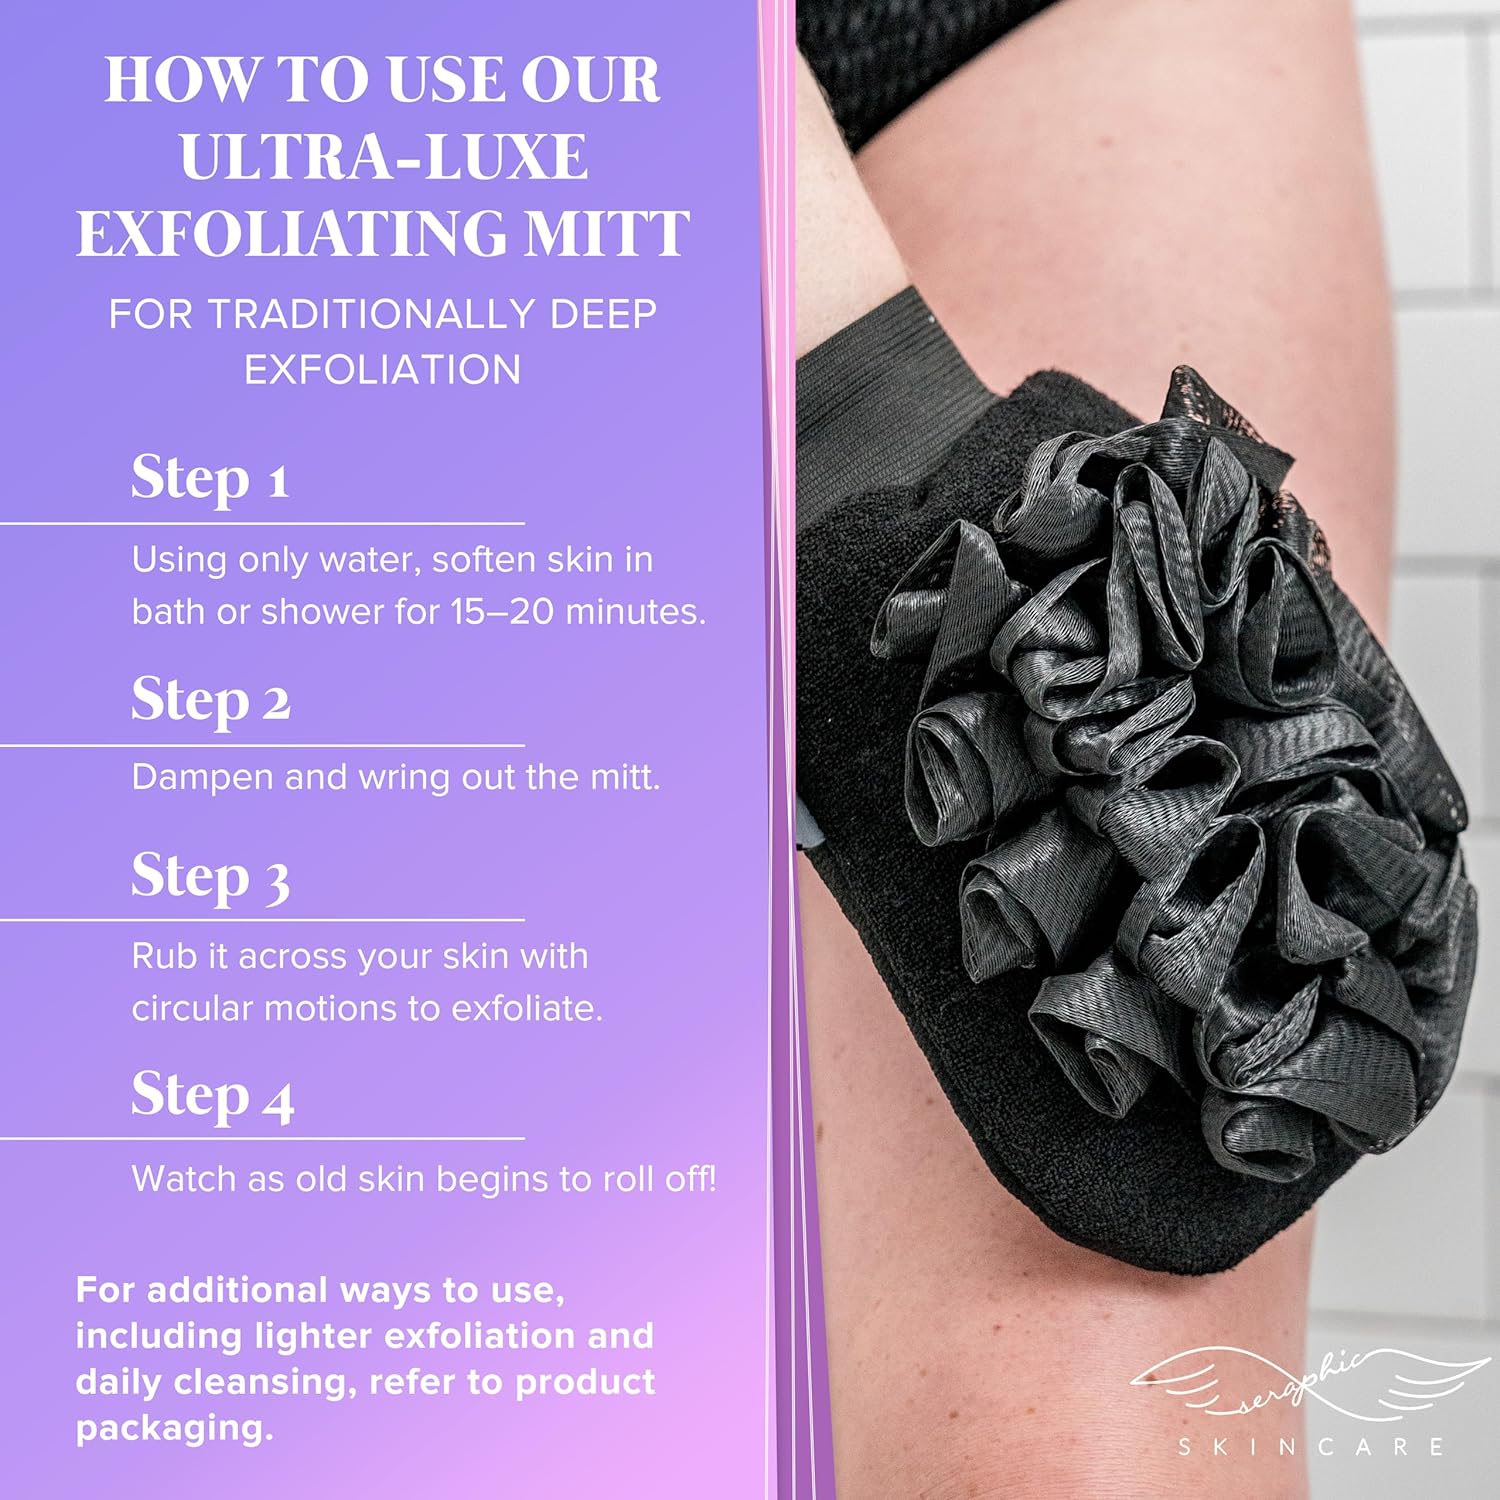 Seraphic Skincare Ultra-Luxe Exfoliating Mitt for Traditional Korean Exfoliation – Body Exfoliator with Mesh Shower Gloves for Gentle Cleansing, Viscose Fiber Loofah to Exfoliate and Rejuvenate Skin